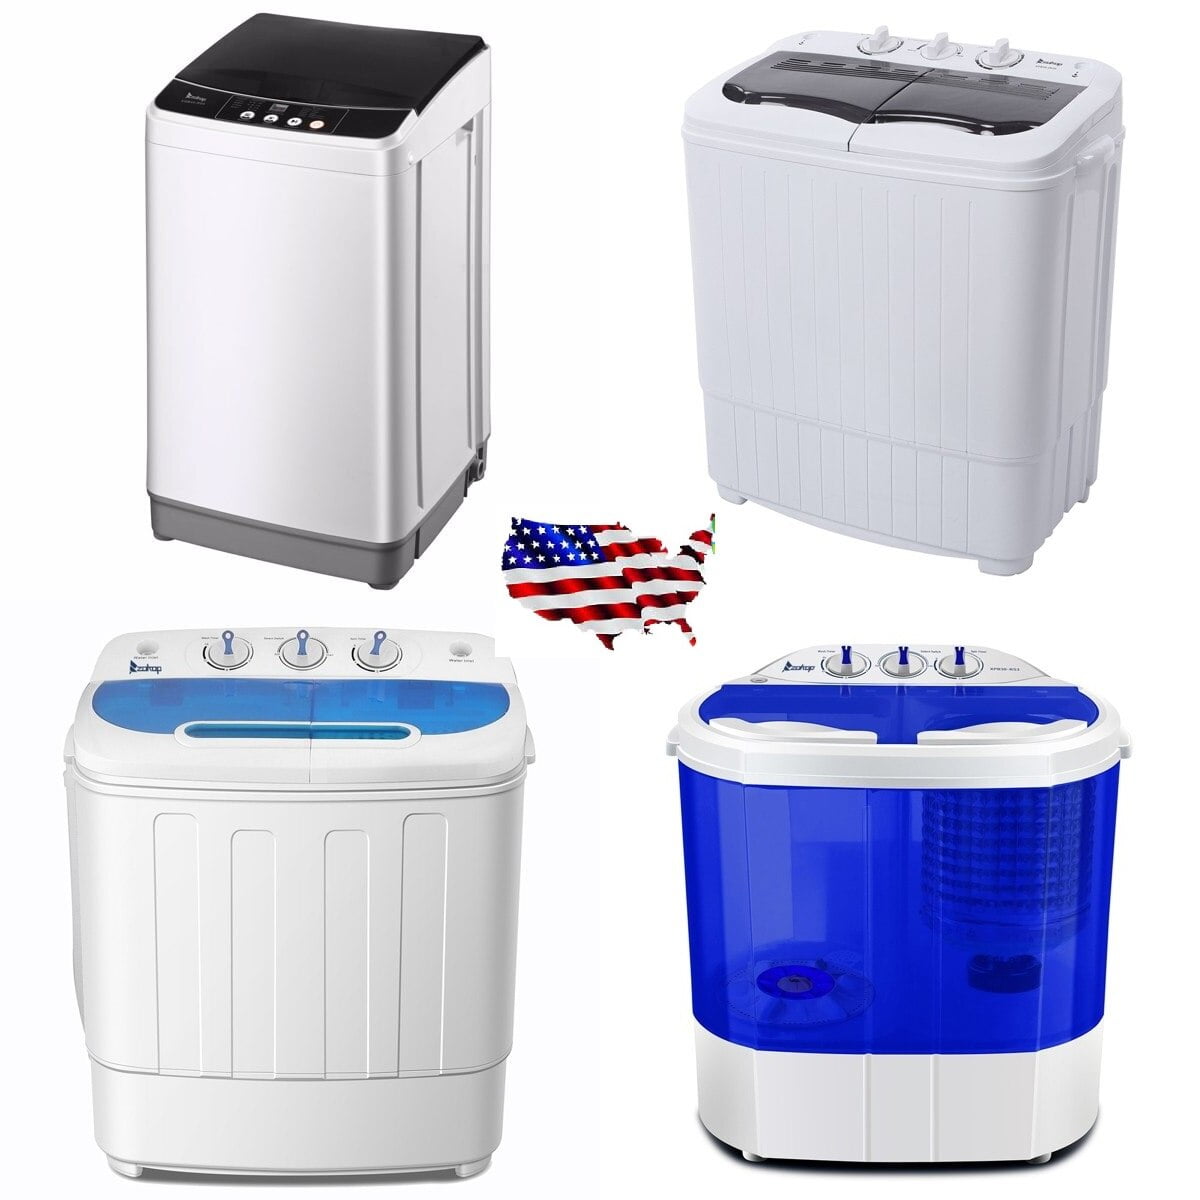 Stackable Washer and Dryer Blue Portable Washer and Dryer Combo For Apartments 11 lbs Washing Capacity Condos RVs Camping DNYKER Portable Compact Washing Machine w/Washer & Spinner 